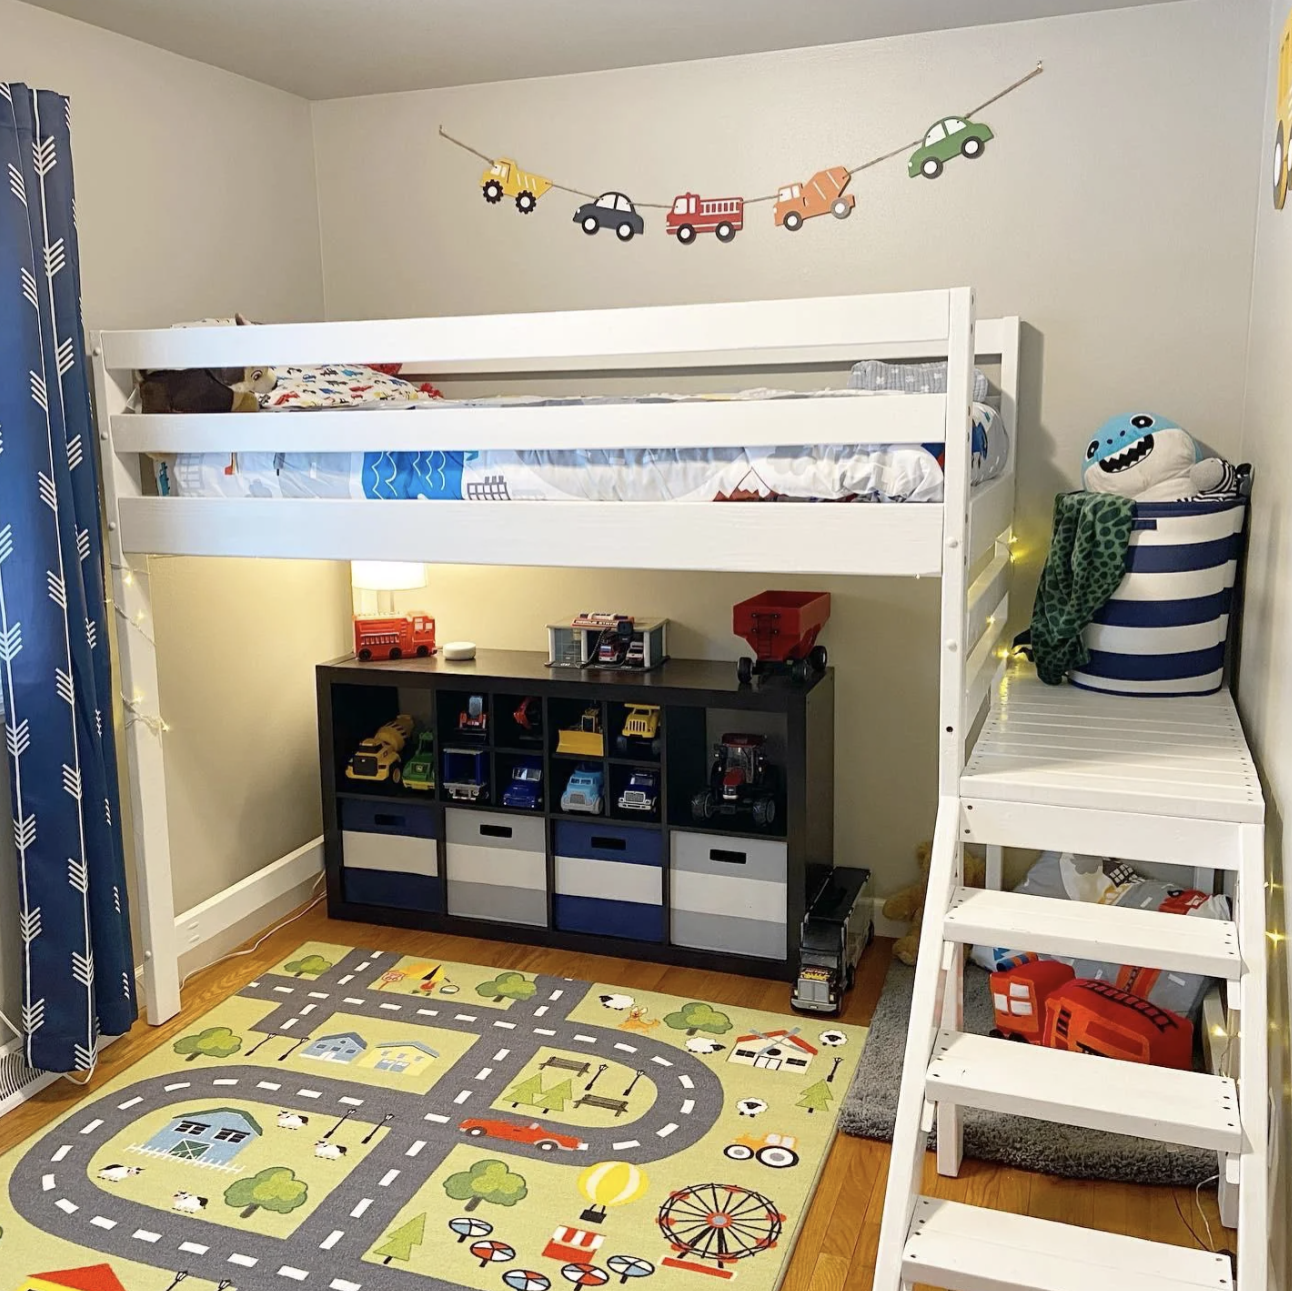 This kid&#x27;s truck-themed bedroom has a road rug, a truck banner, and an array of trucks sitting on a shelf